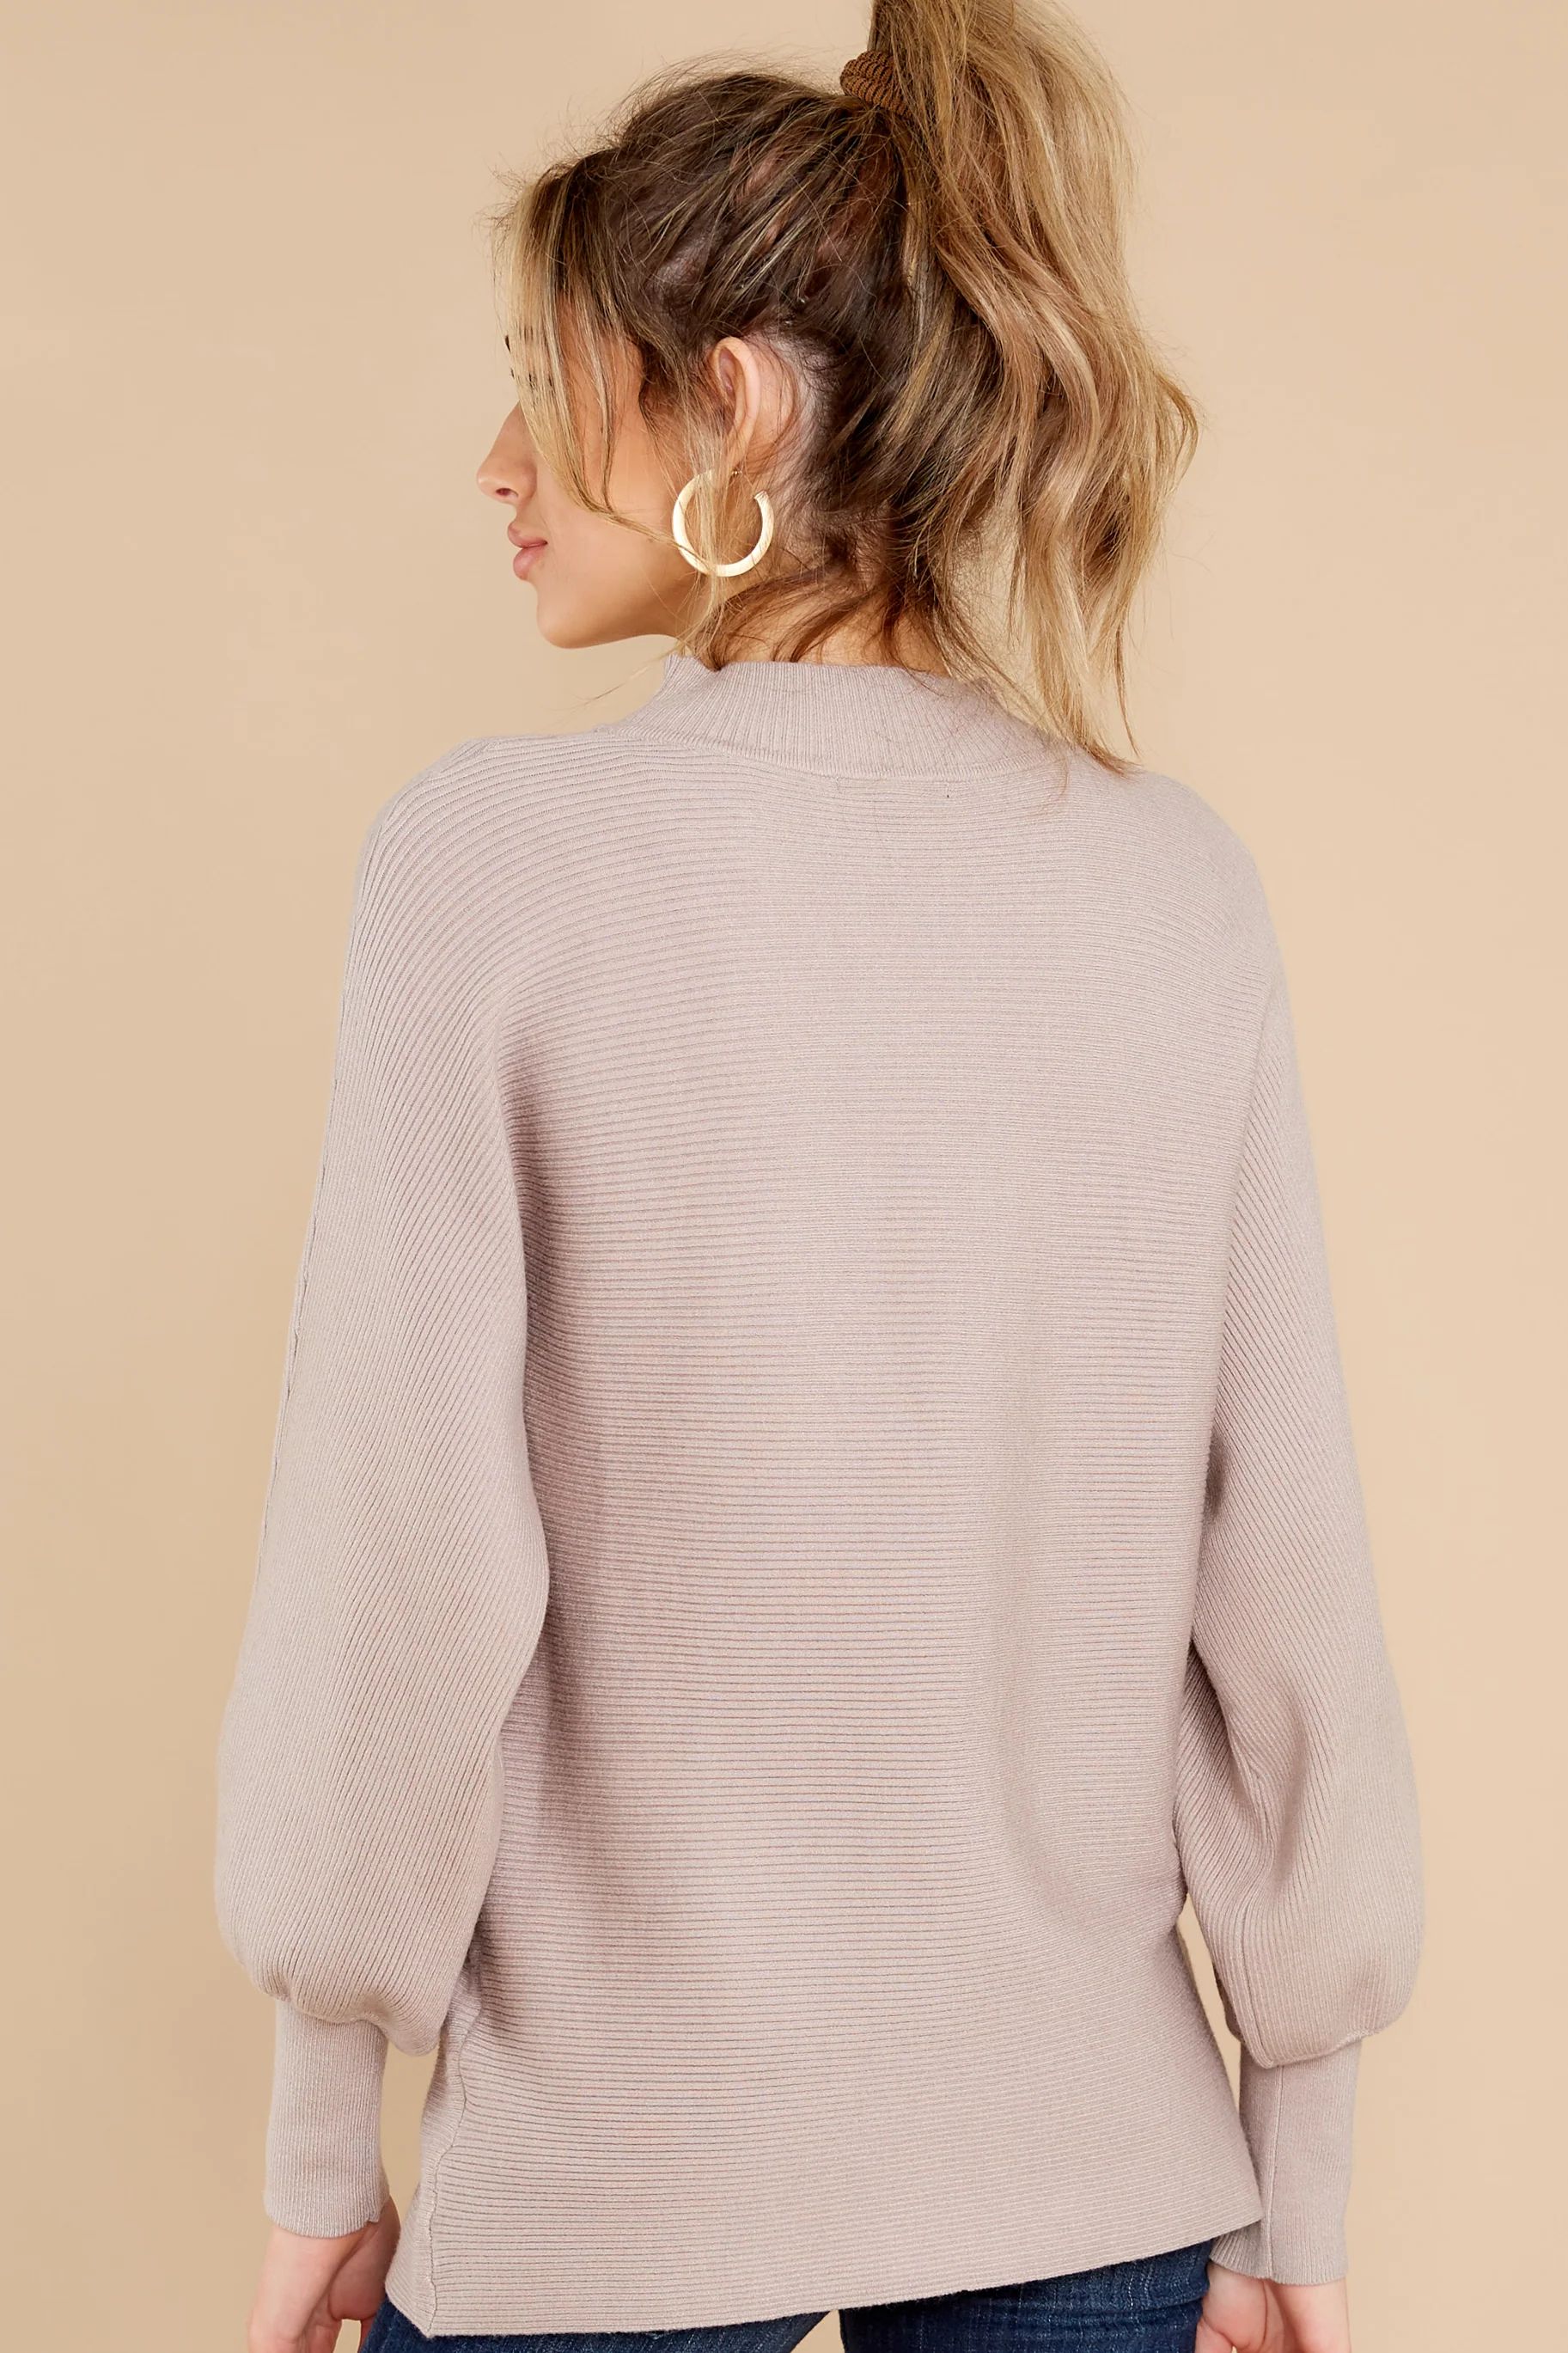 Thinking About Tomorrow Taupe Sweater | Red Dress 